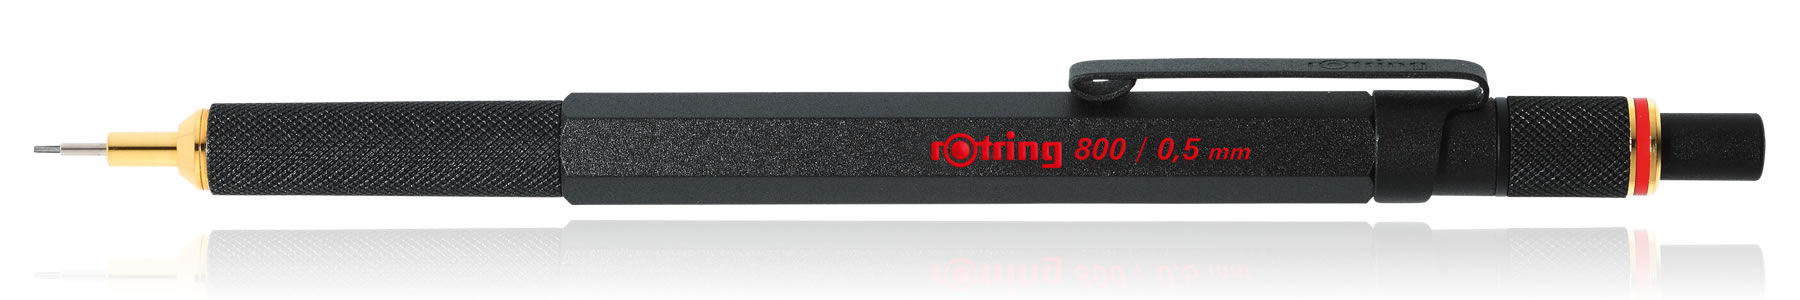 rOtring 800 Retractable Mechanical Pencil - Abakcus